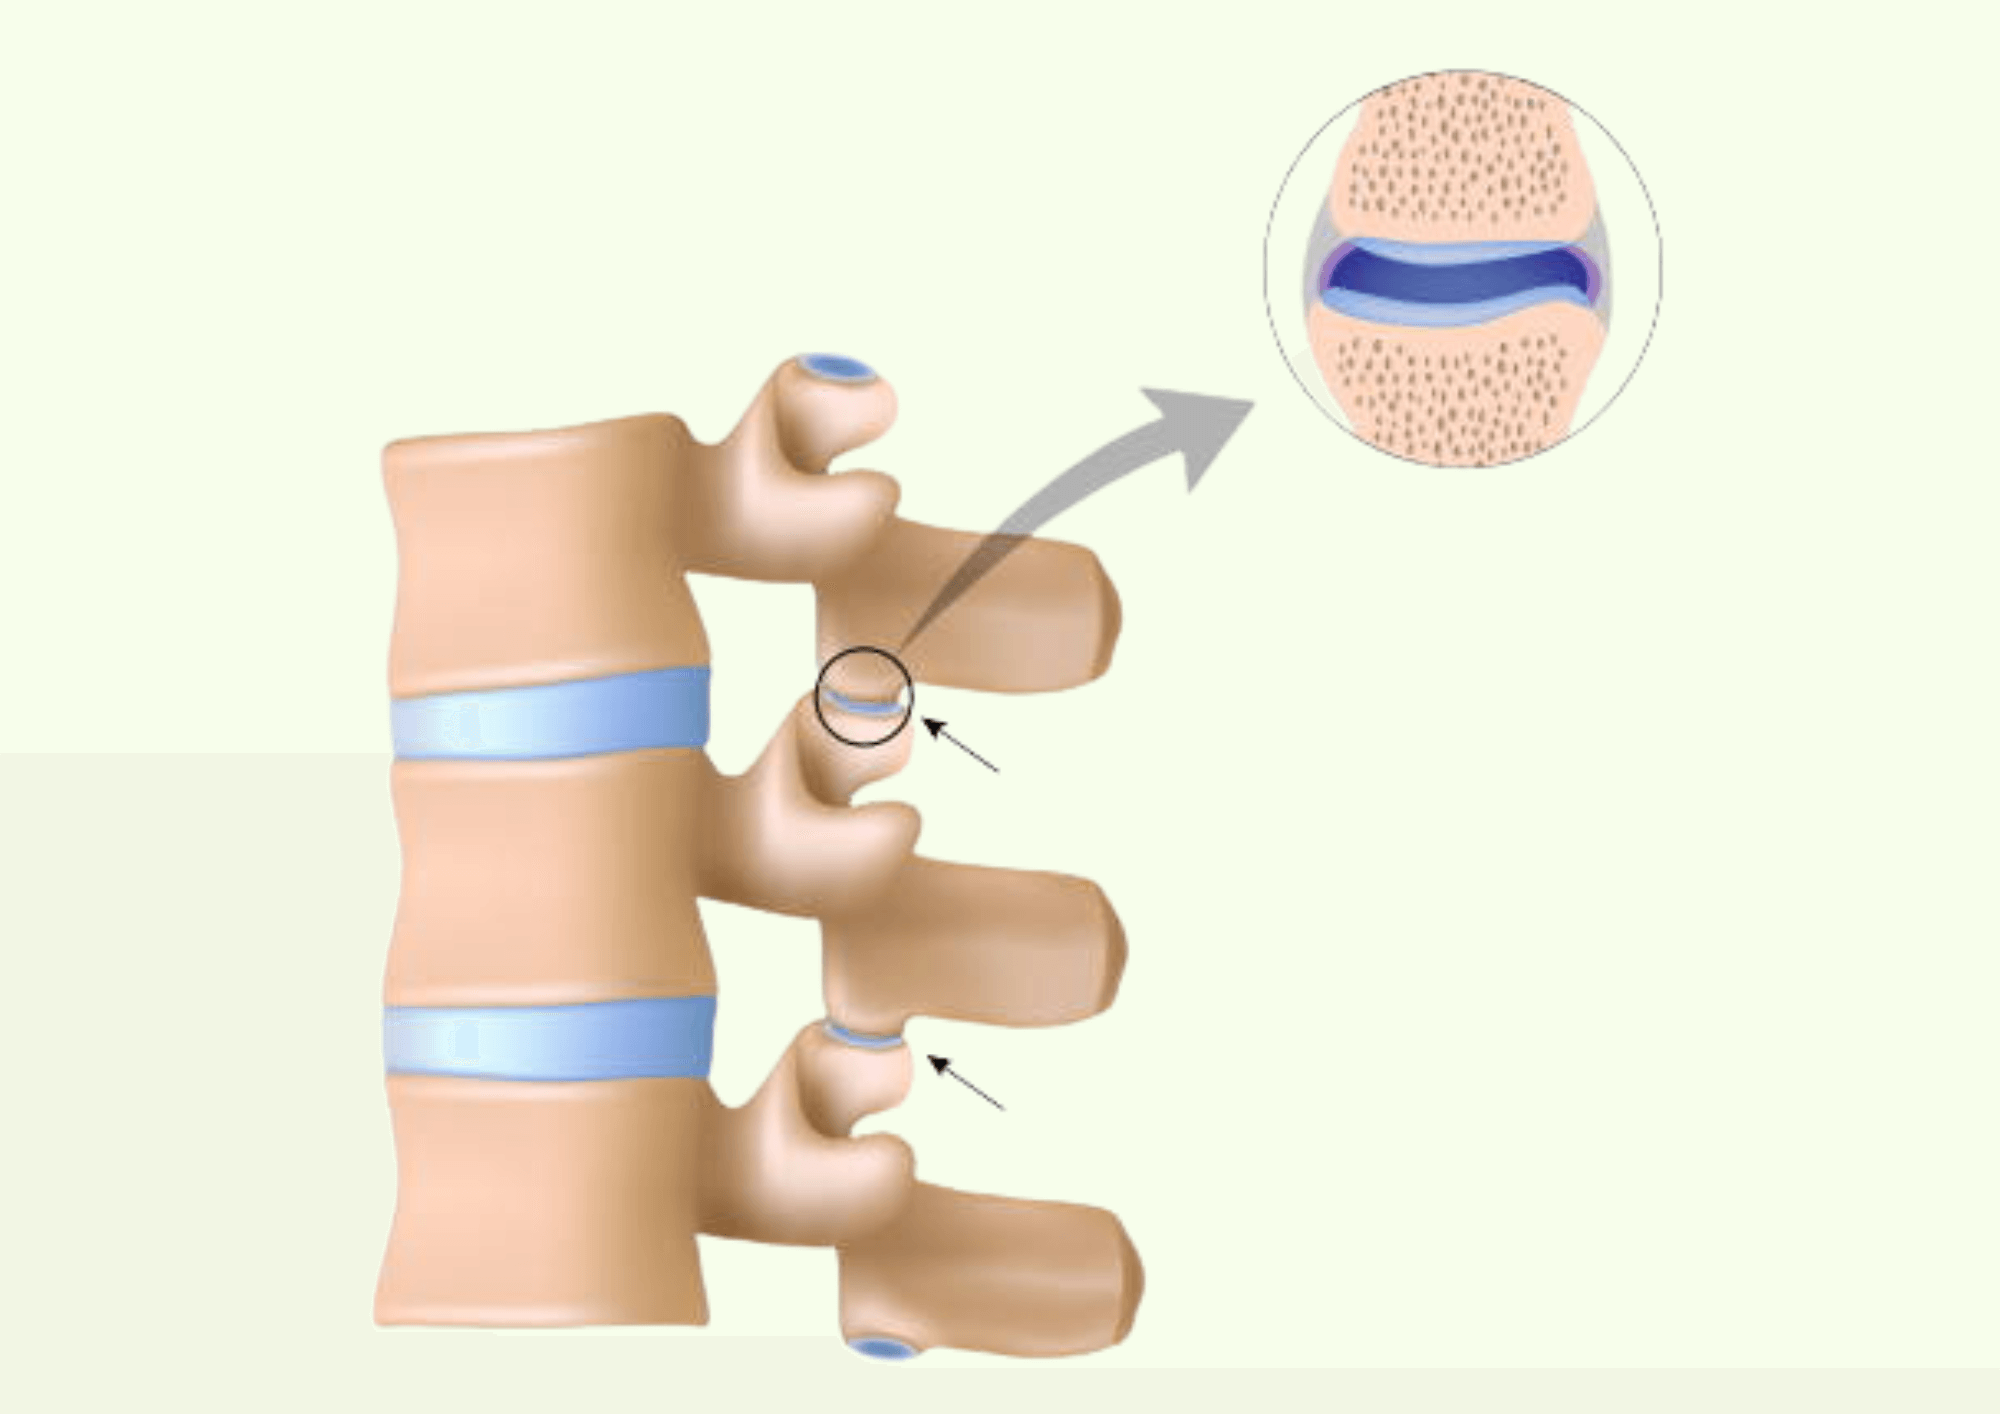 Image of spine and joints to show affected areas of spondylarthrosis.